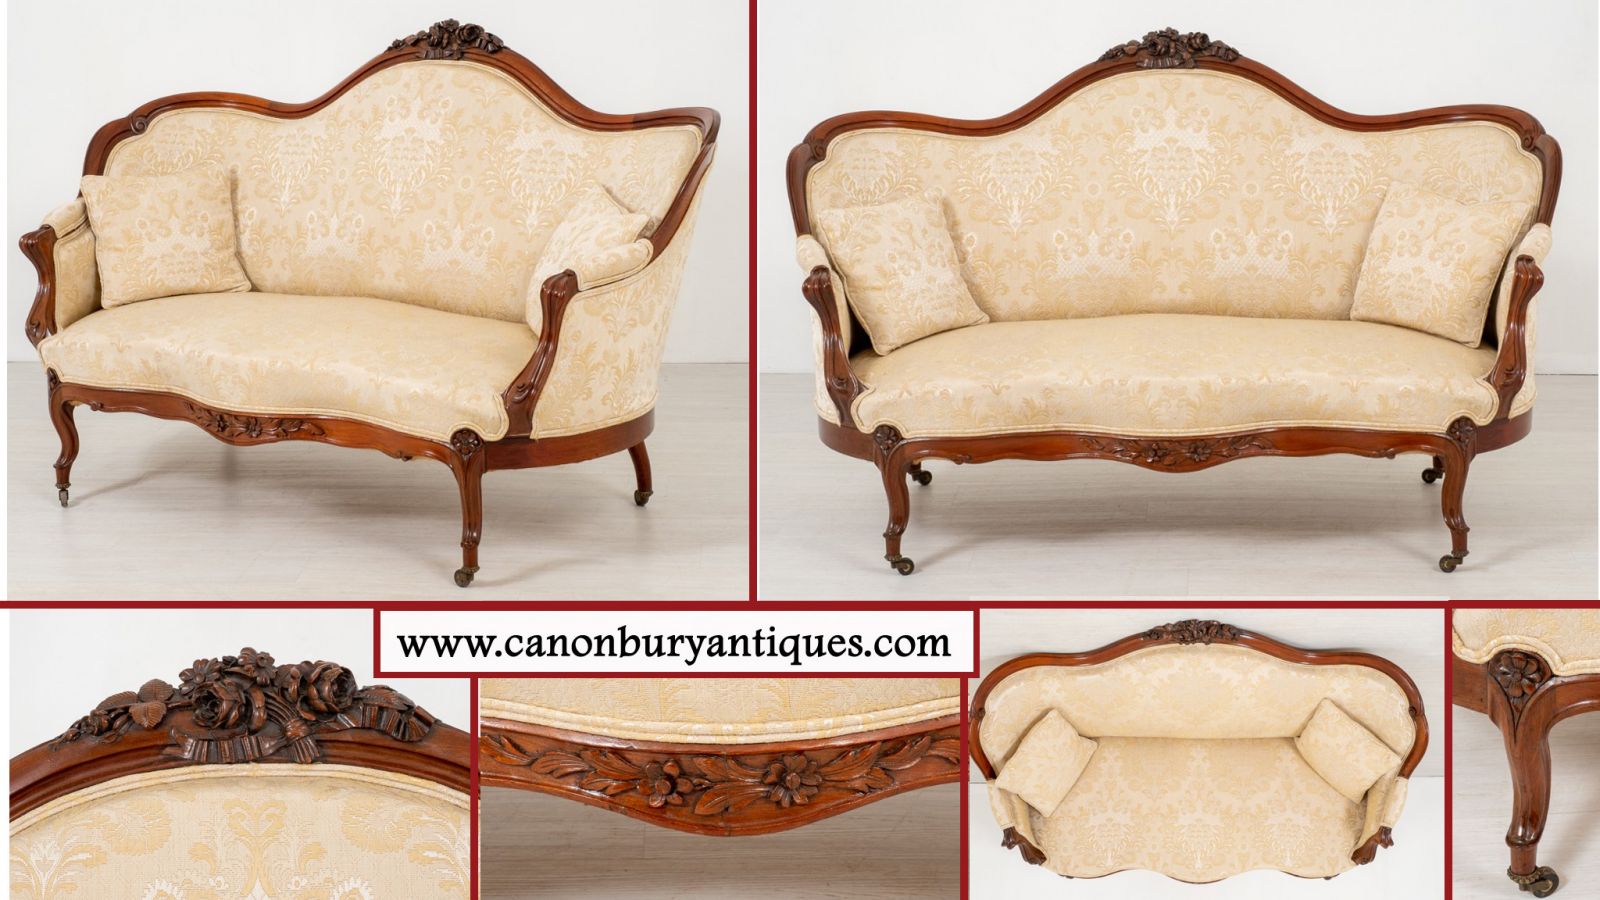 Victorian Settee Mahogany - Antique Carved Couch 1870